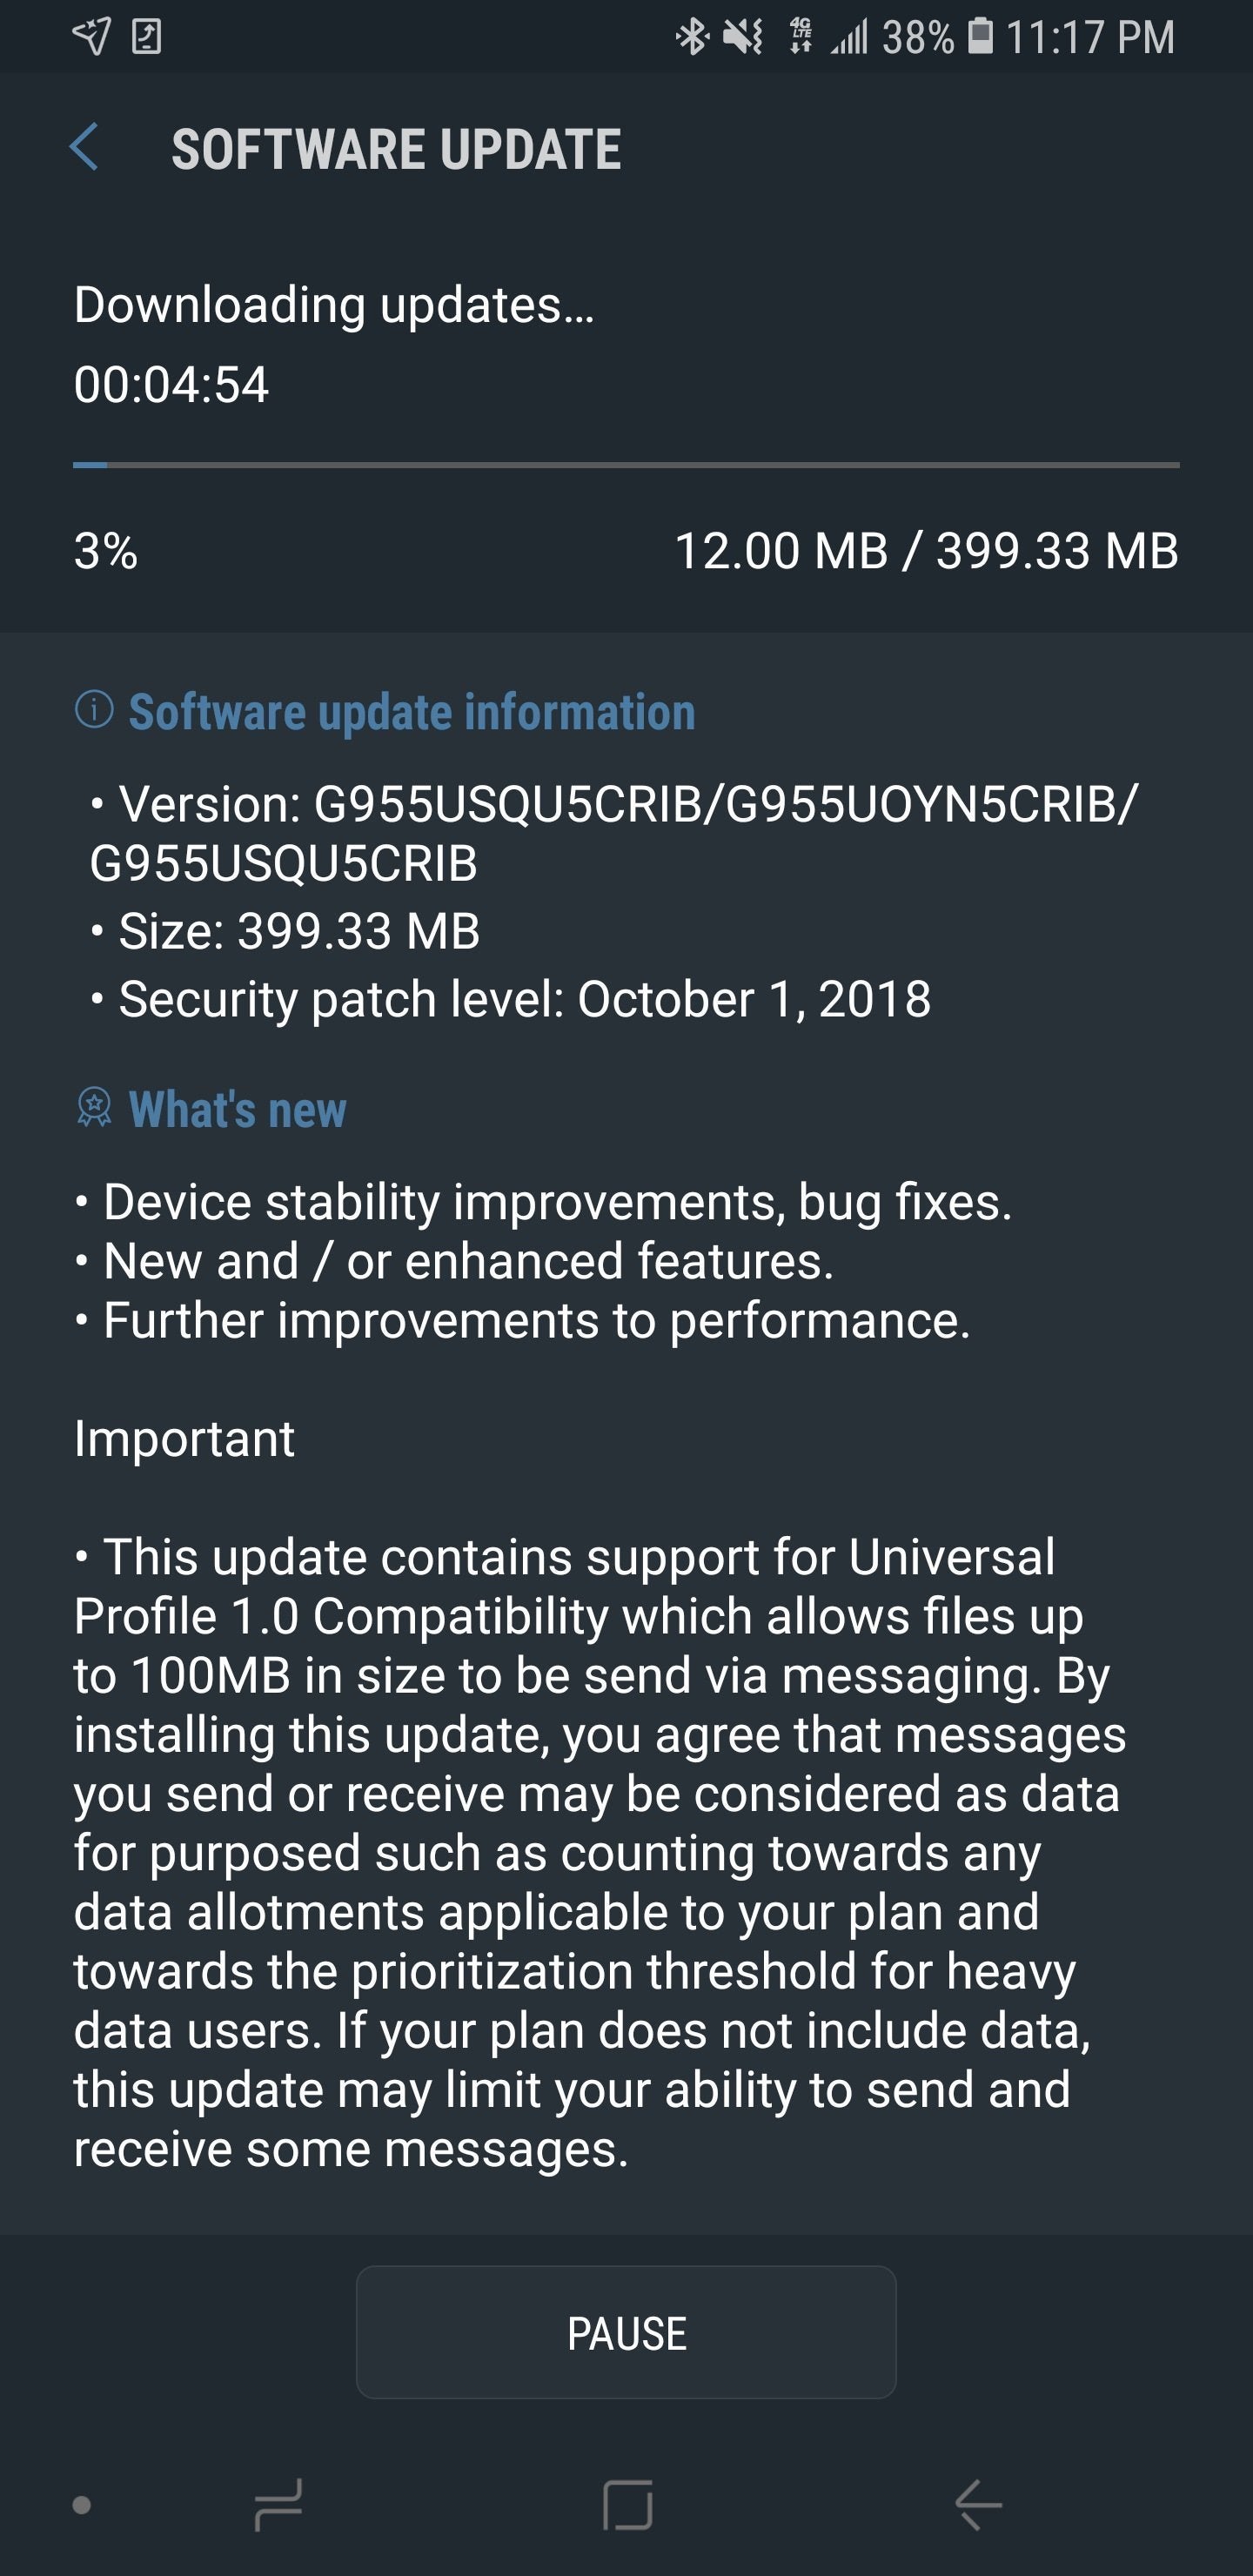 Samsung Galaxy S8 and S8+ updated with RCS Universal Profile support at T-Mobile